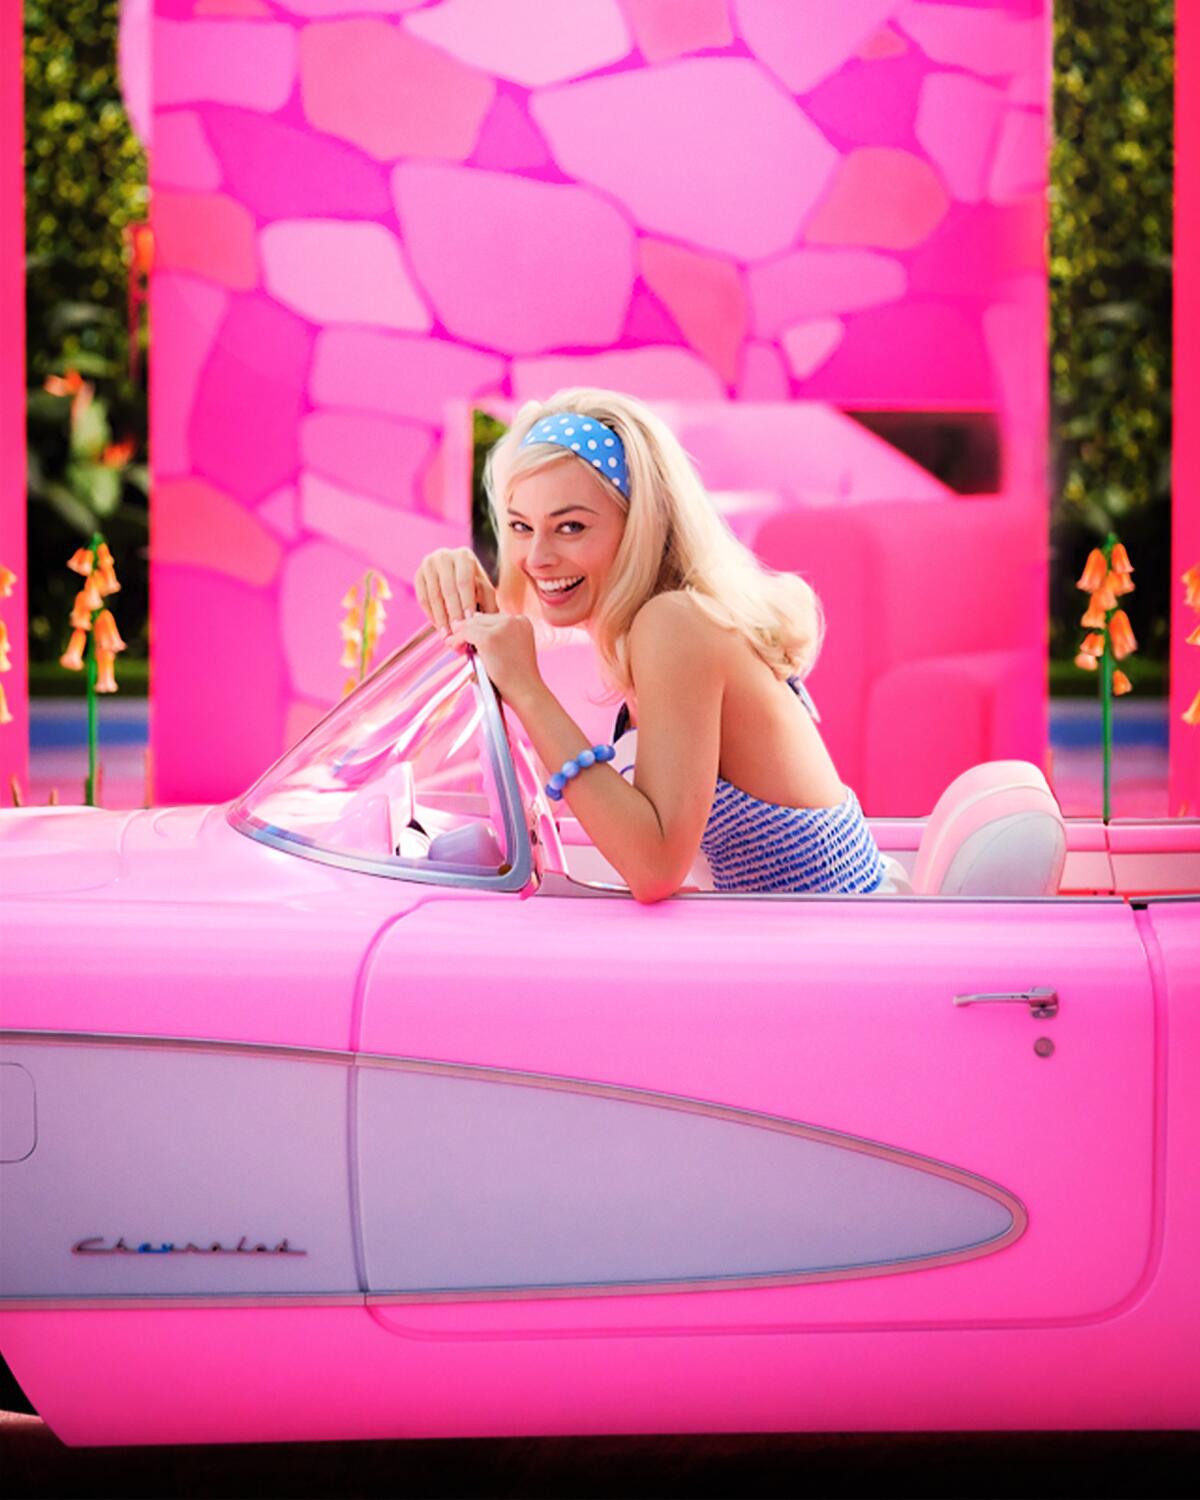 A woman with blond hair in a blue outfit drives a pink convertible car.